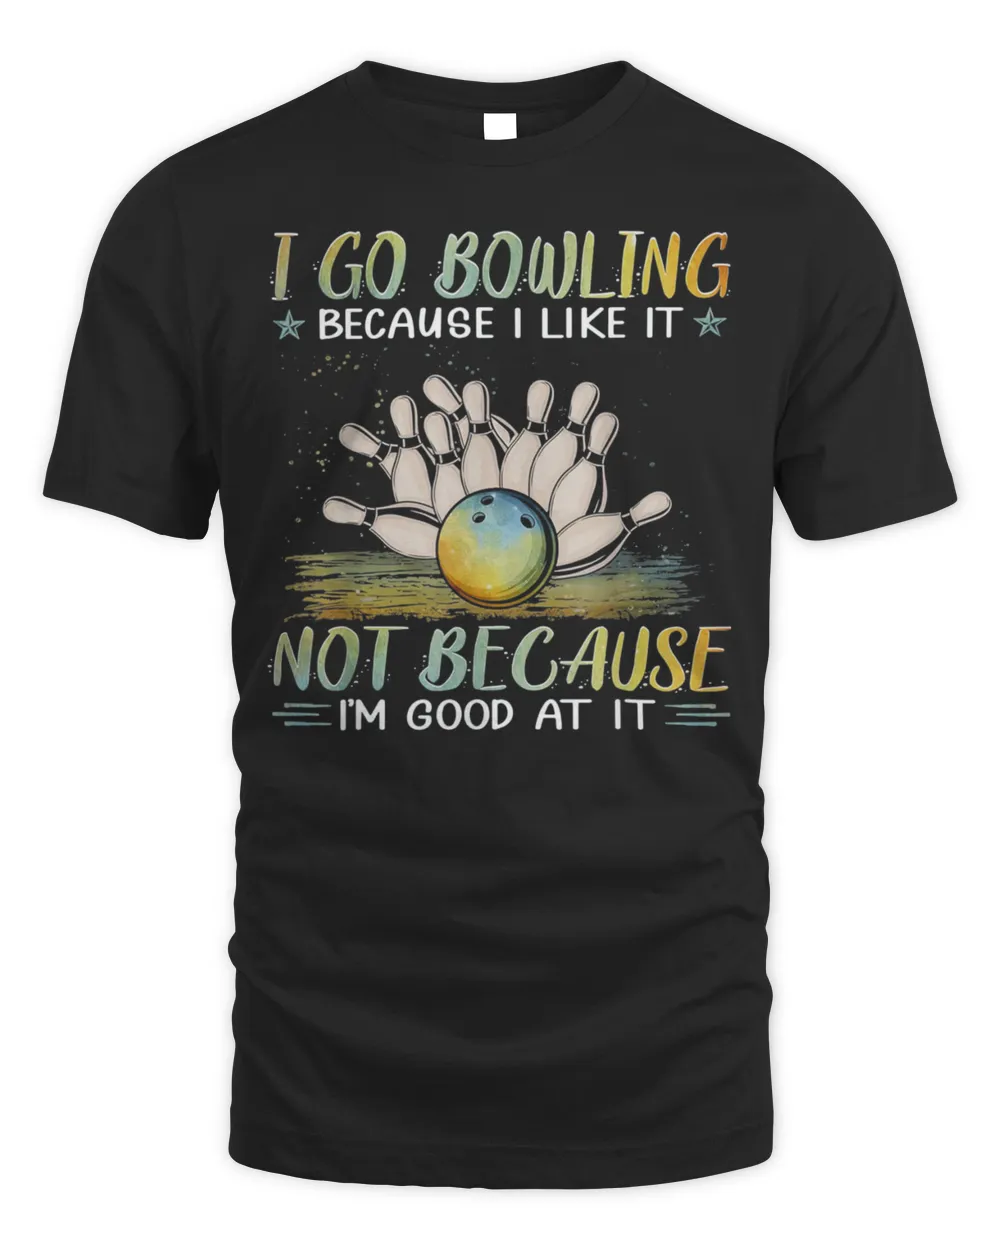 I go bowling because I like it not because I’m good at it Tee Shirt